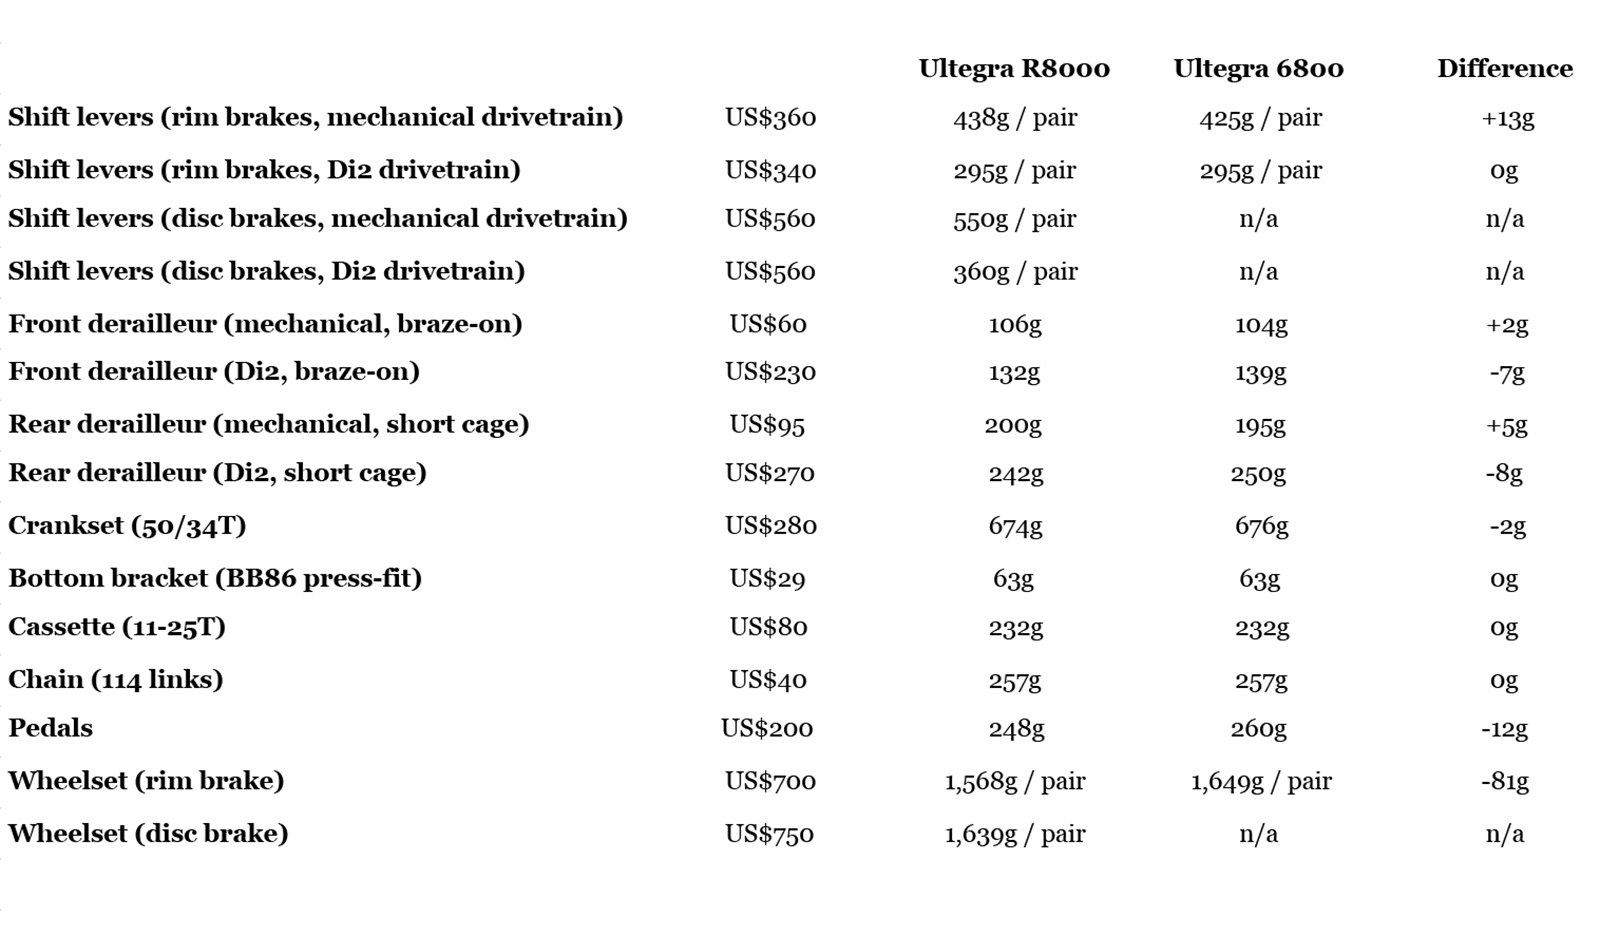 Shimano-Ultegra-R8000-vs-6800-weights-and-prices